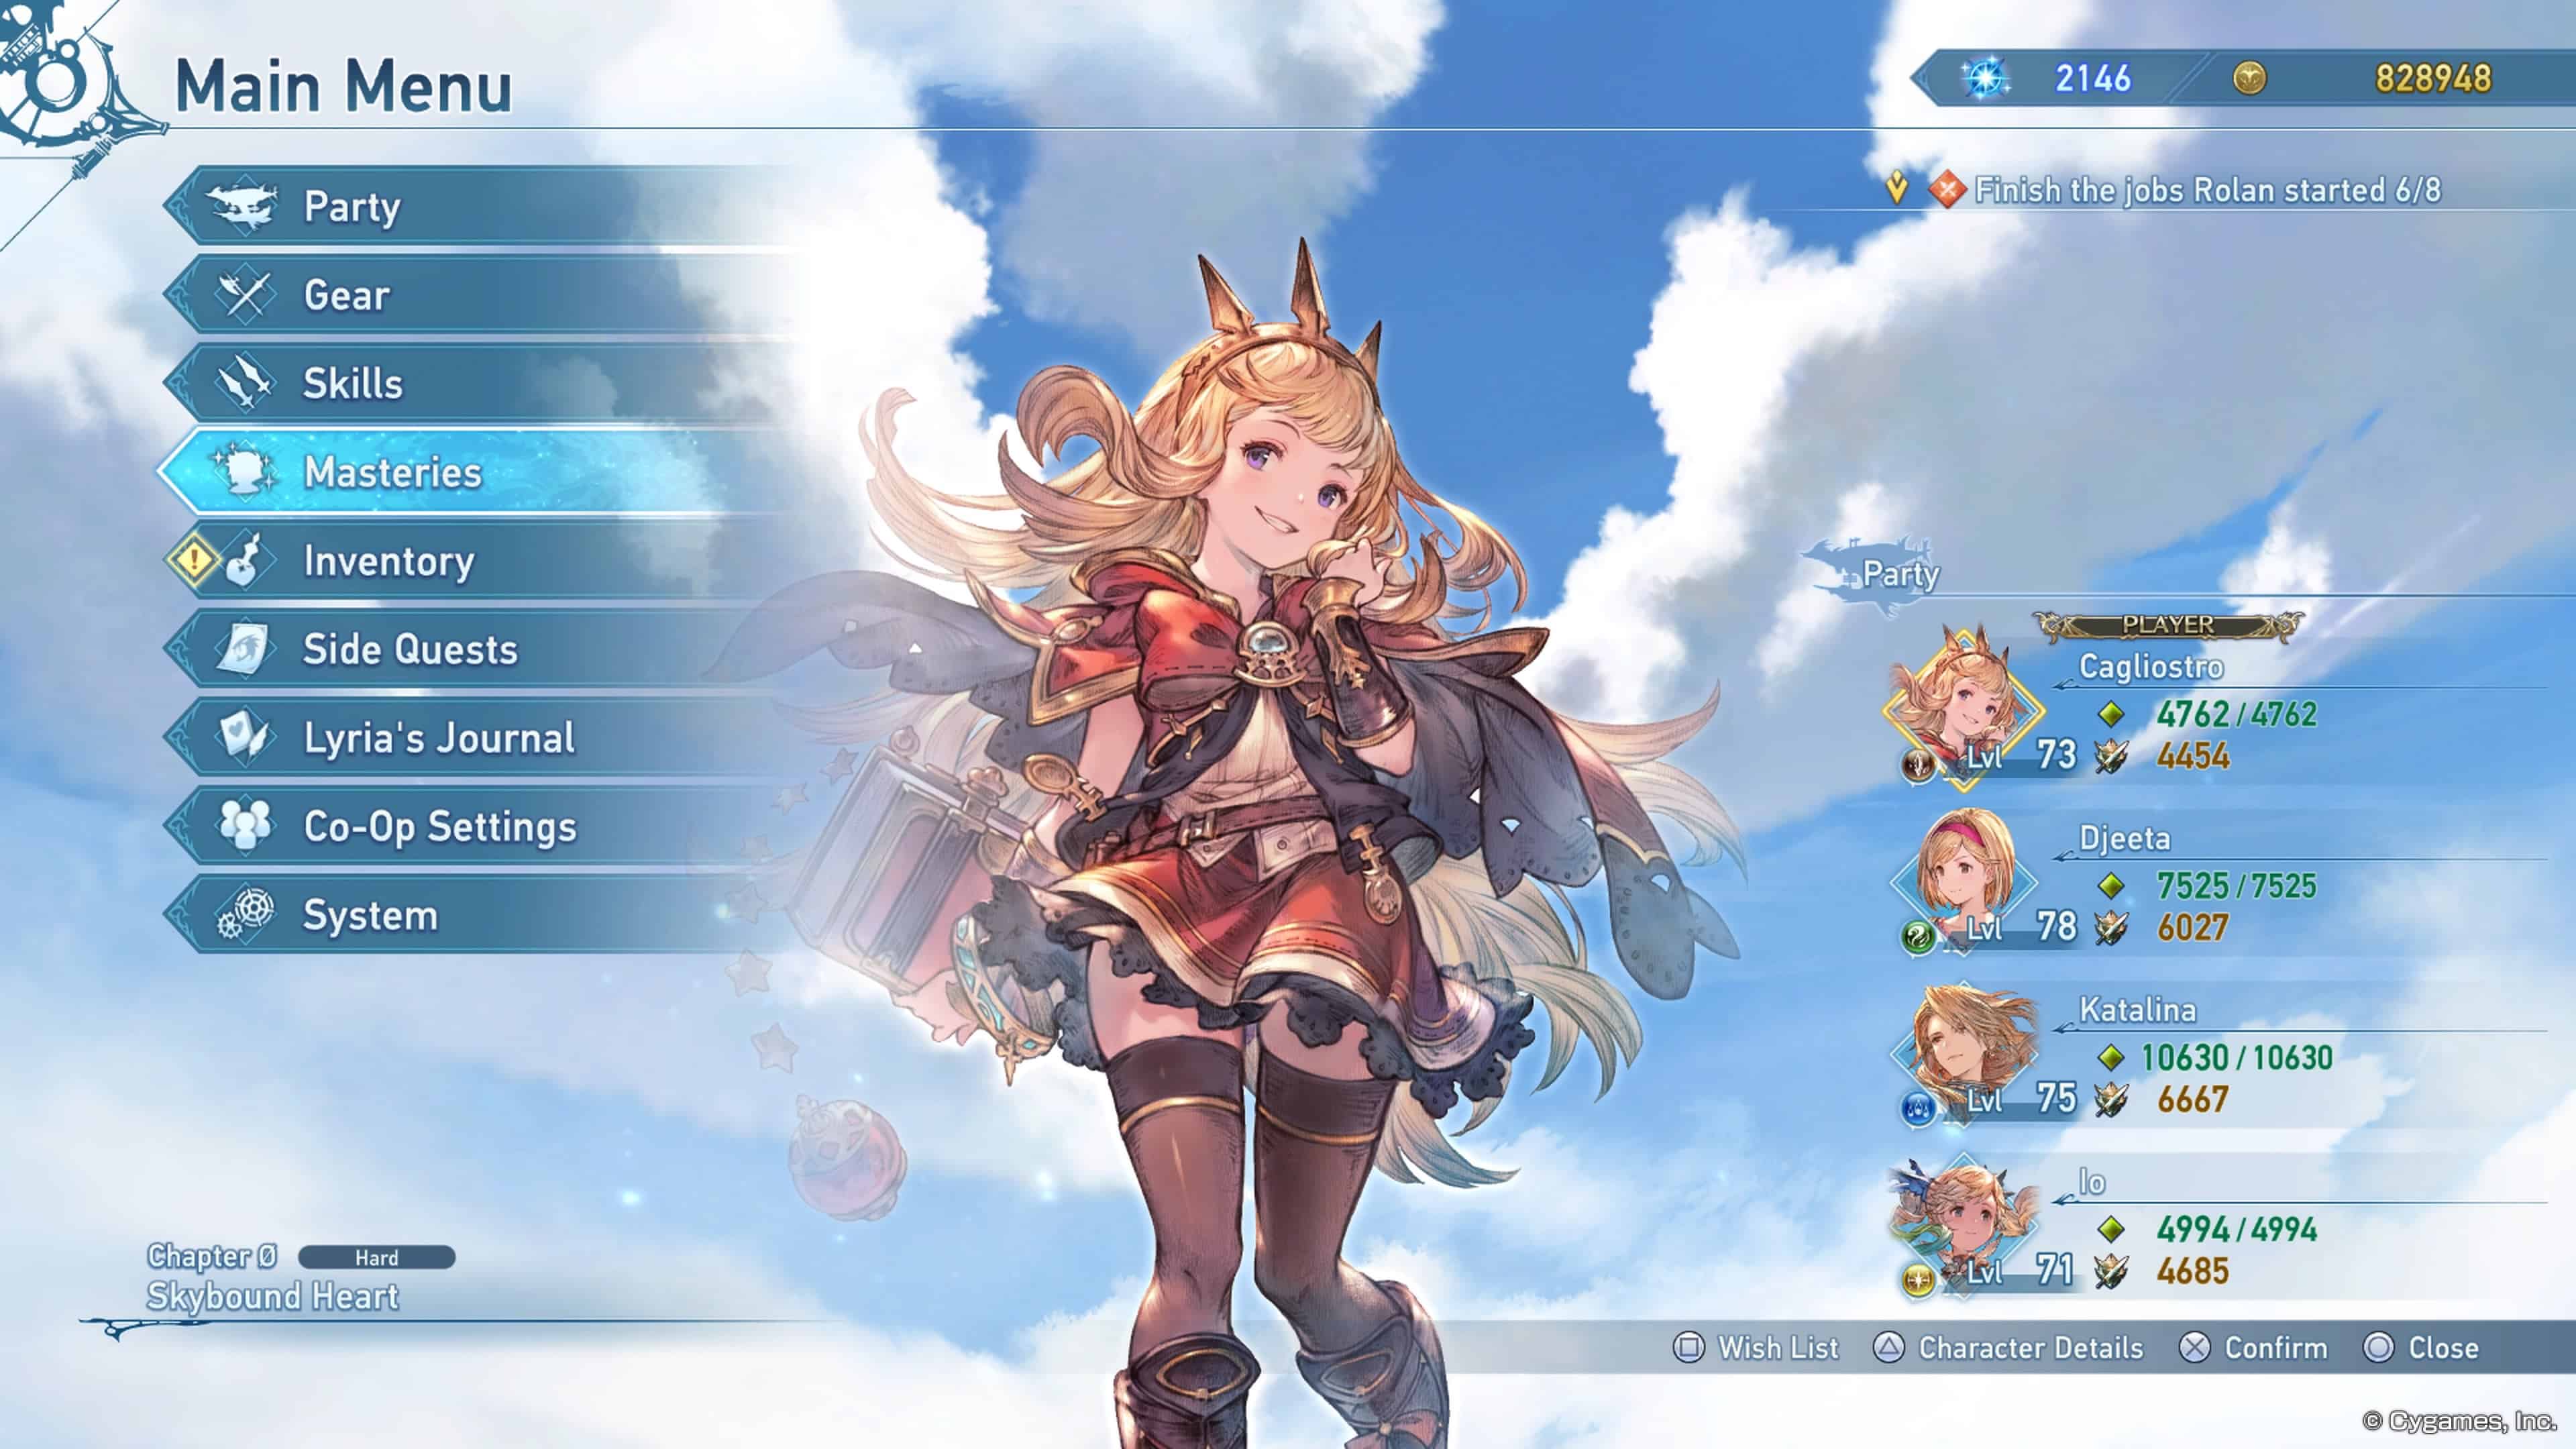 Cagliostro in the main menu, showing the Masteries tab